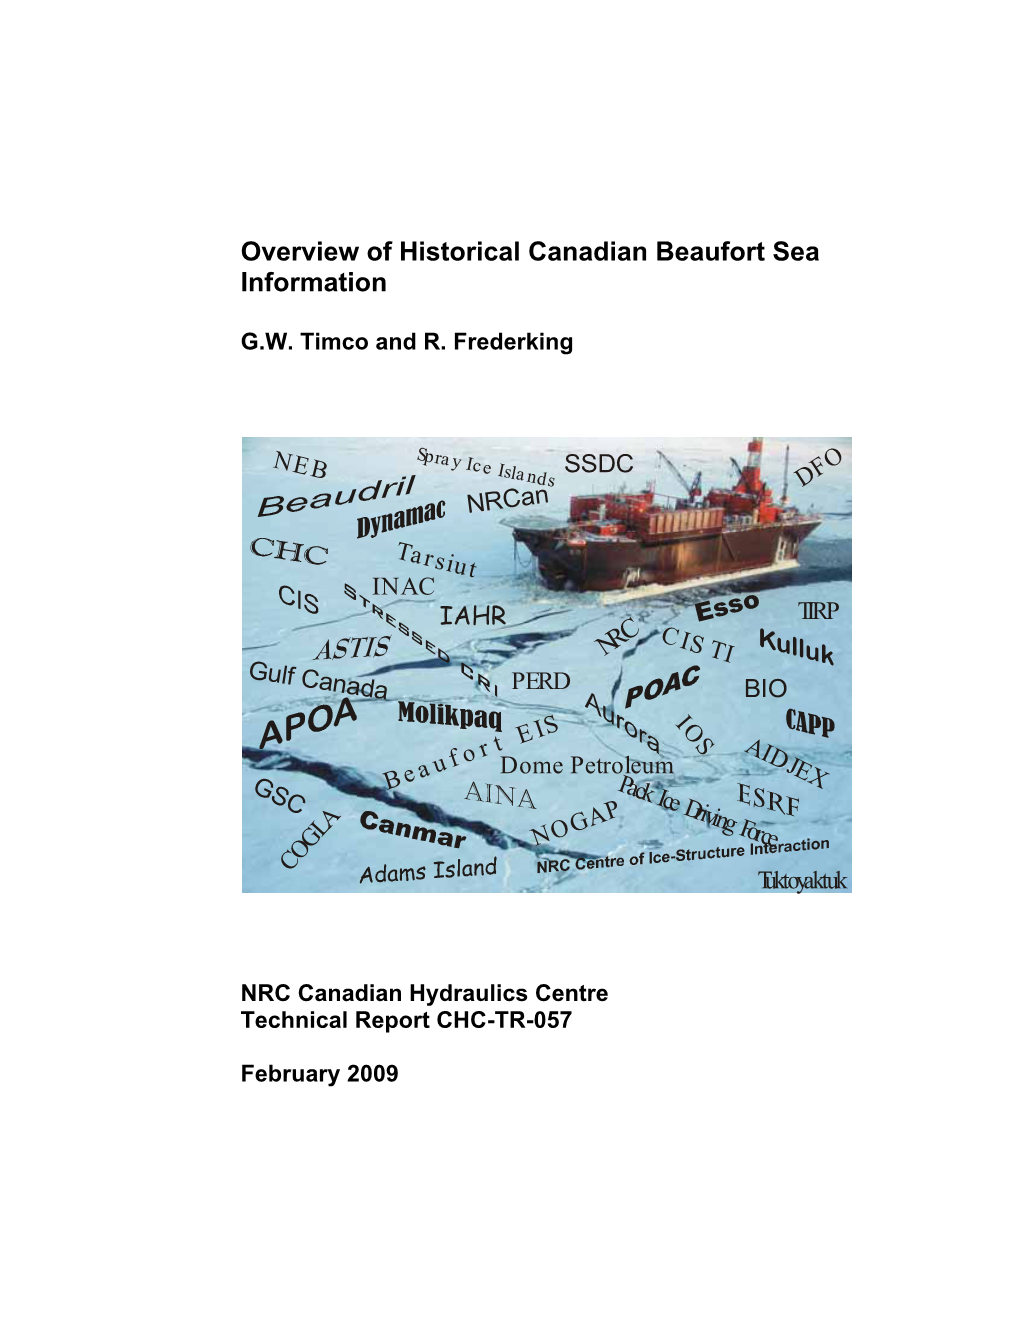 Overview of Historical Canadian Beaufort Sea Information